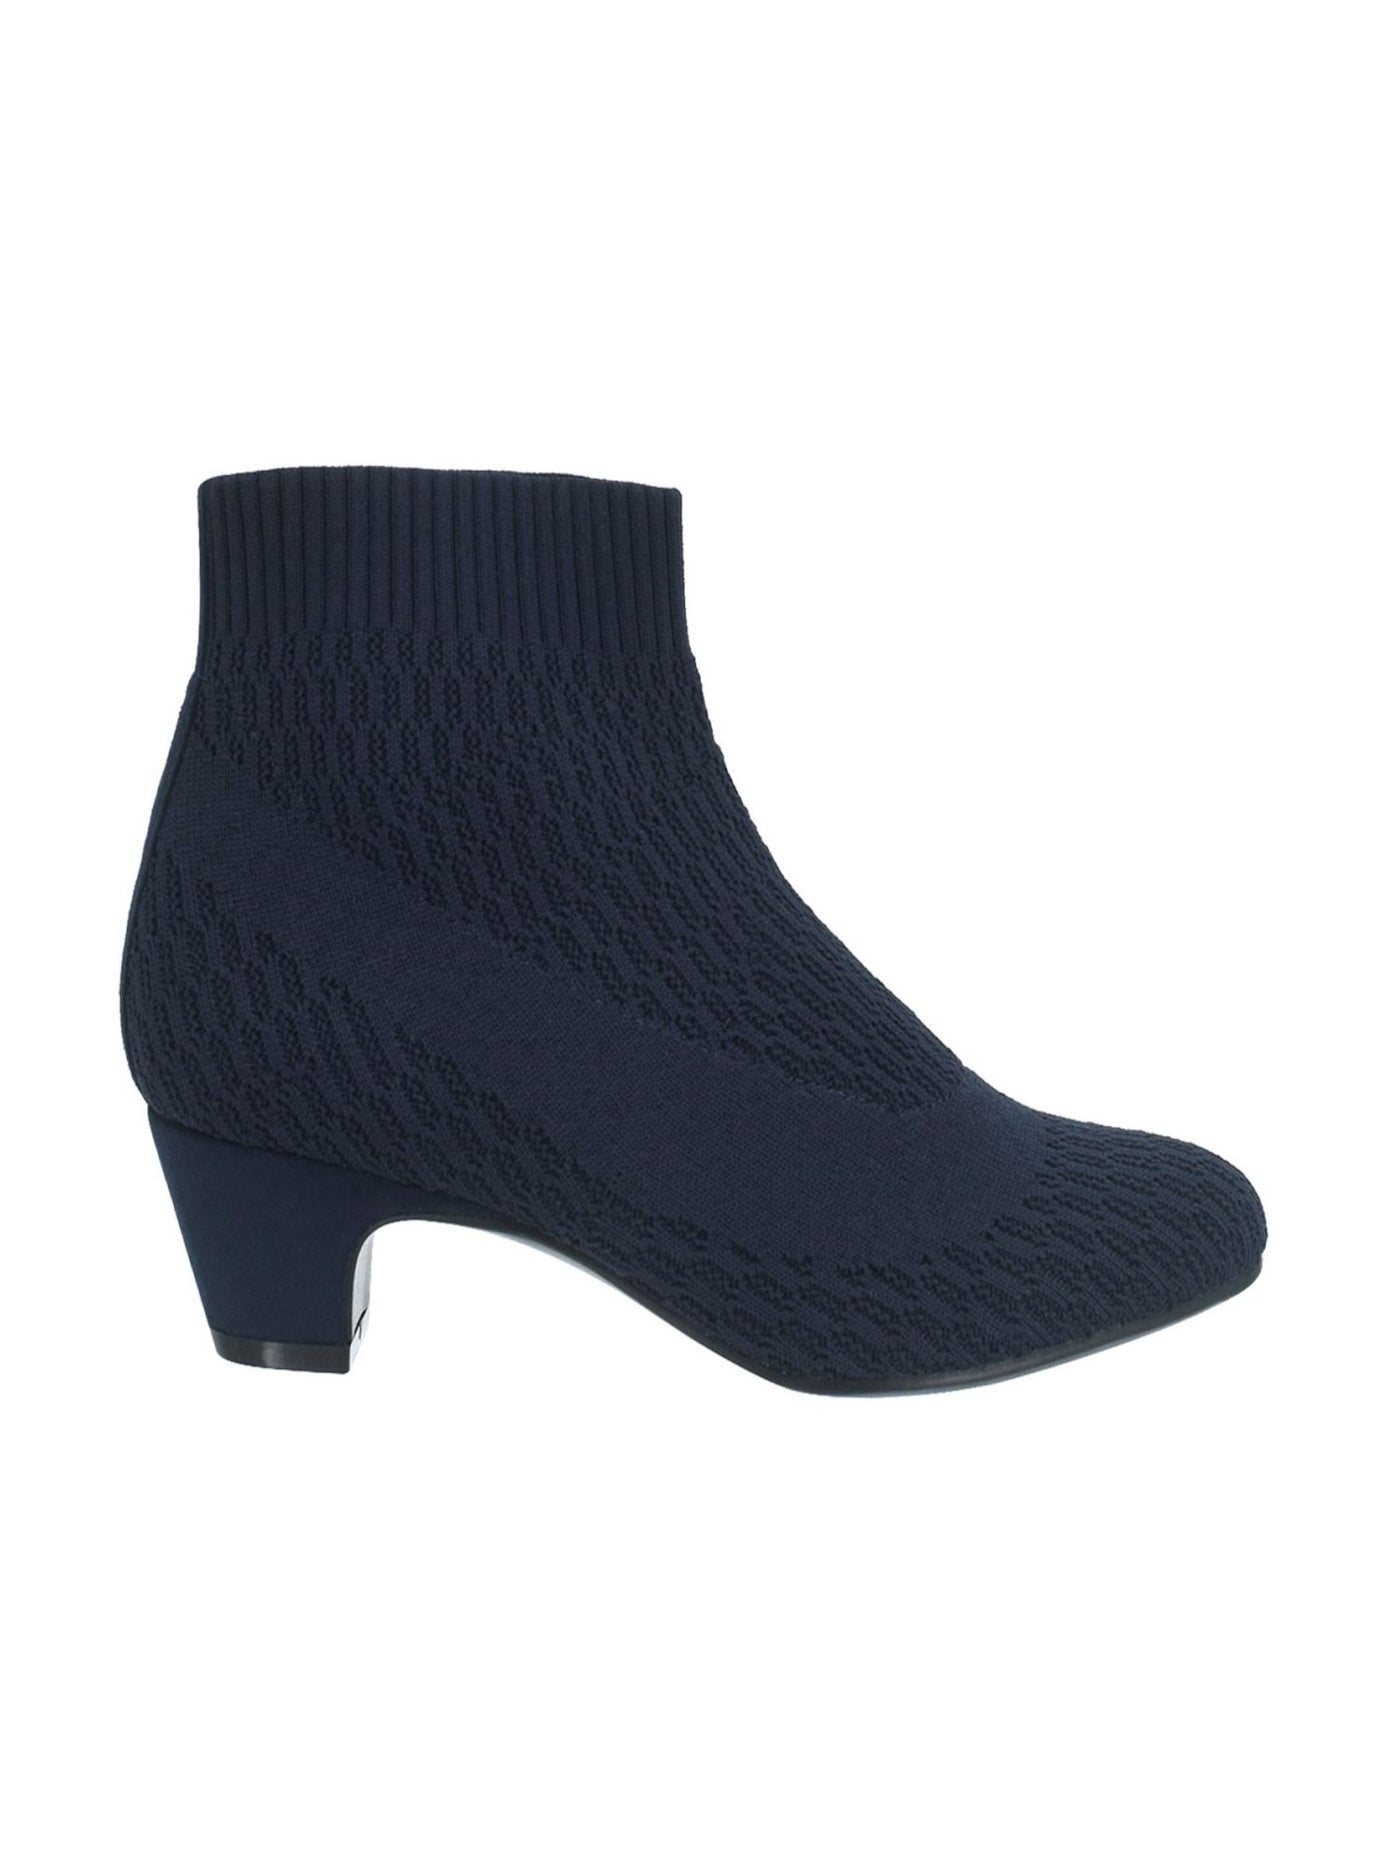 IMPO Womens Navy Knit Cushioned Gewel Almond Toe Booties 8 M